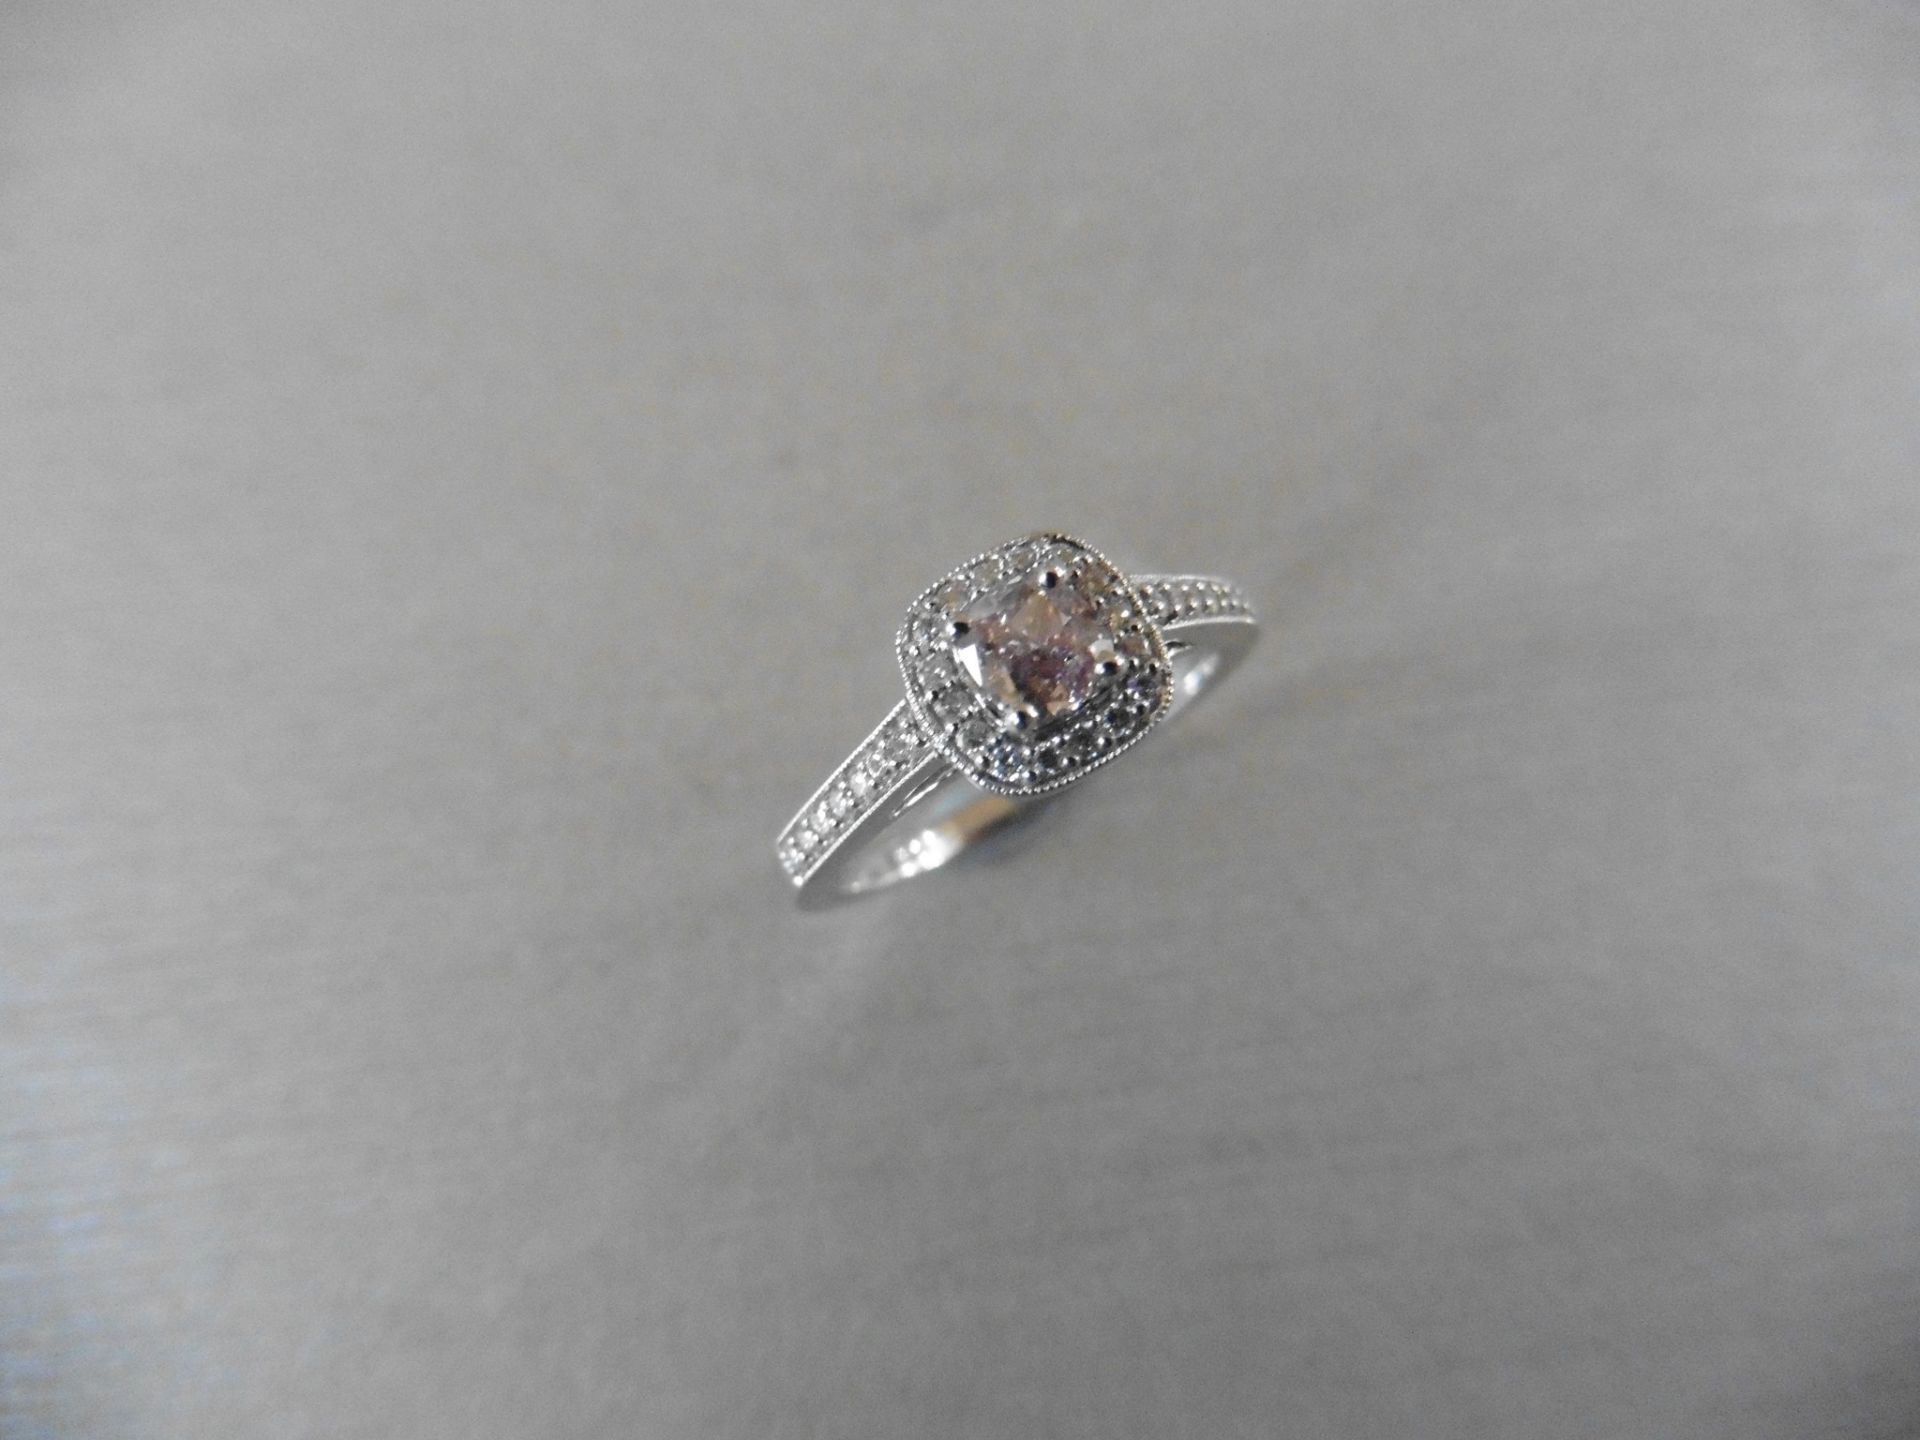 0.35ct / 0.18ct diamond set solitaire ring. Centre stone is a pink cushion cut diamond, GIA